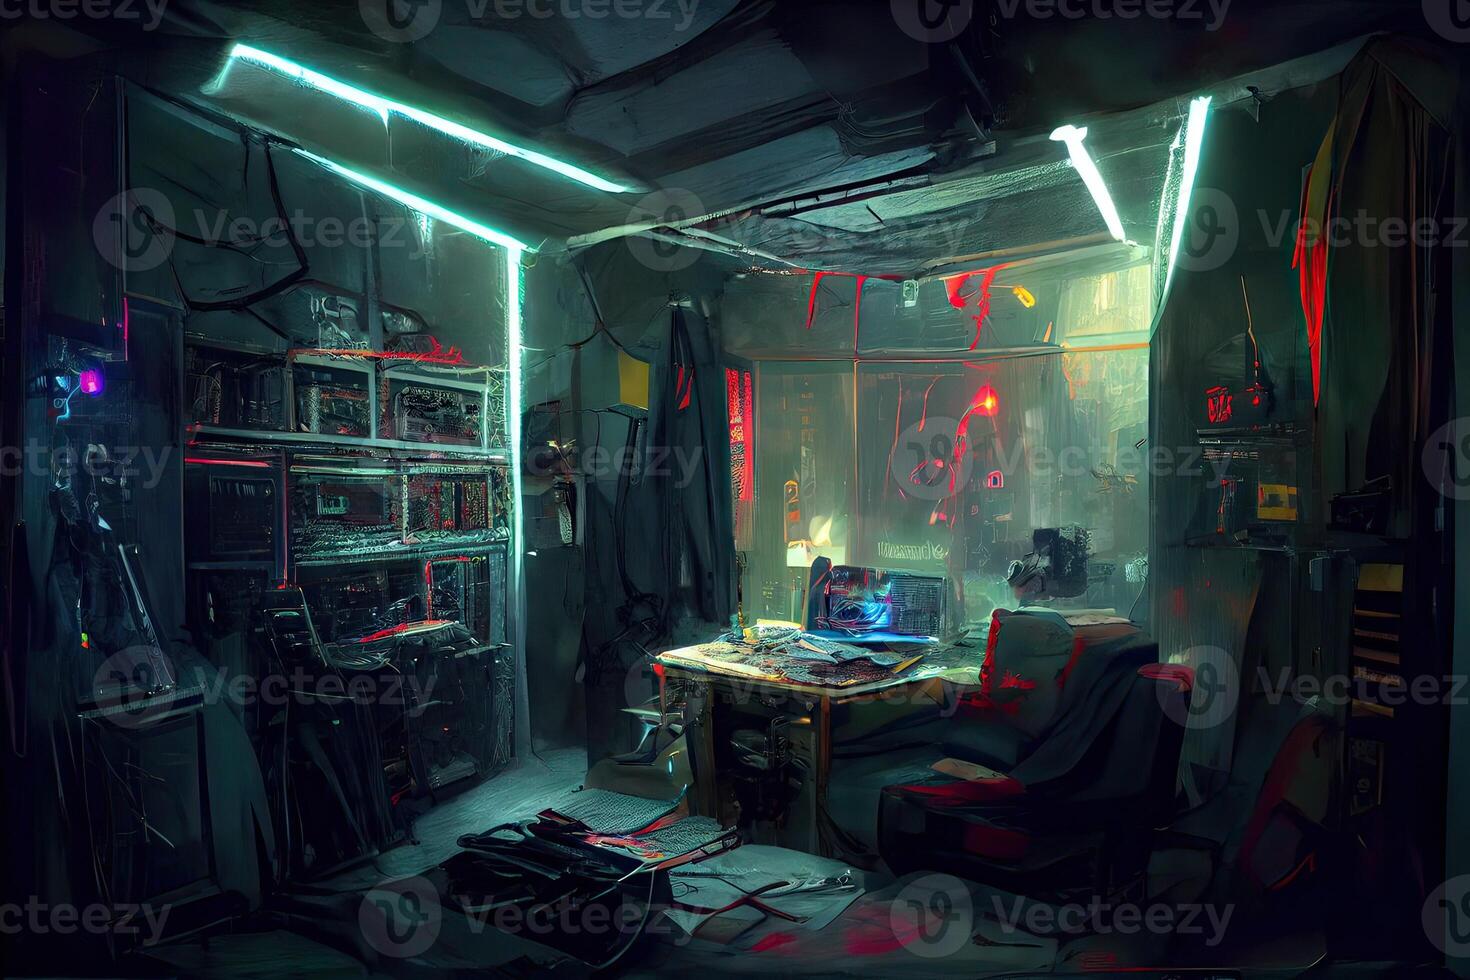 illustration of messy and dark cyberpunk hacker hideout room with lights photo